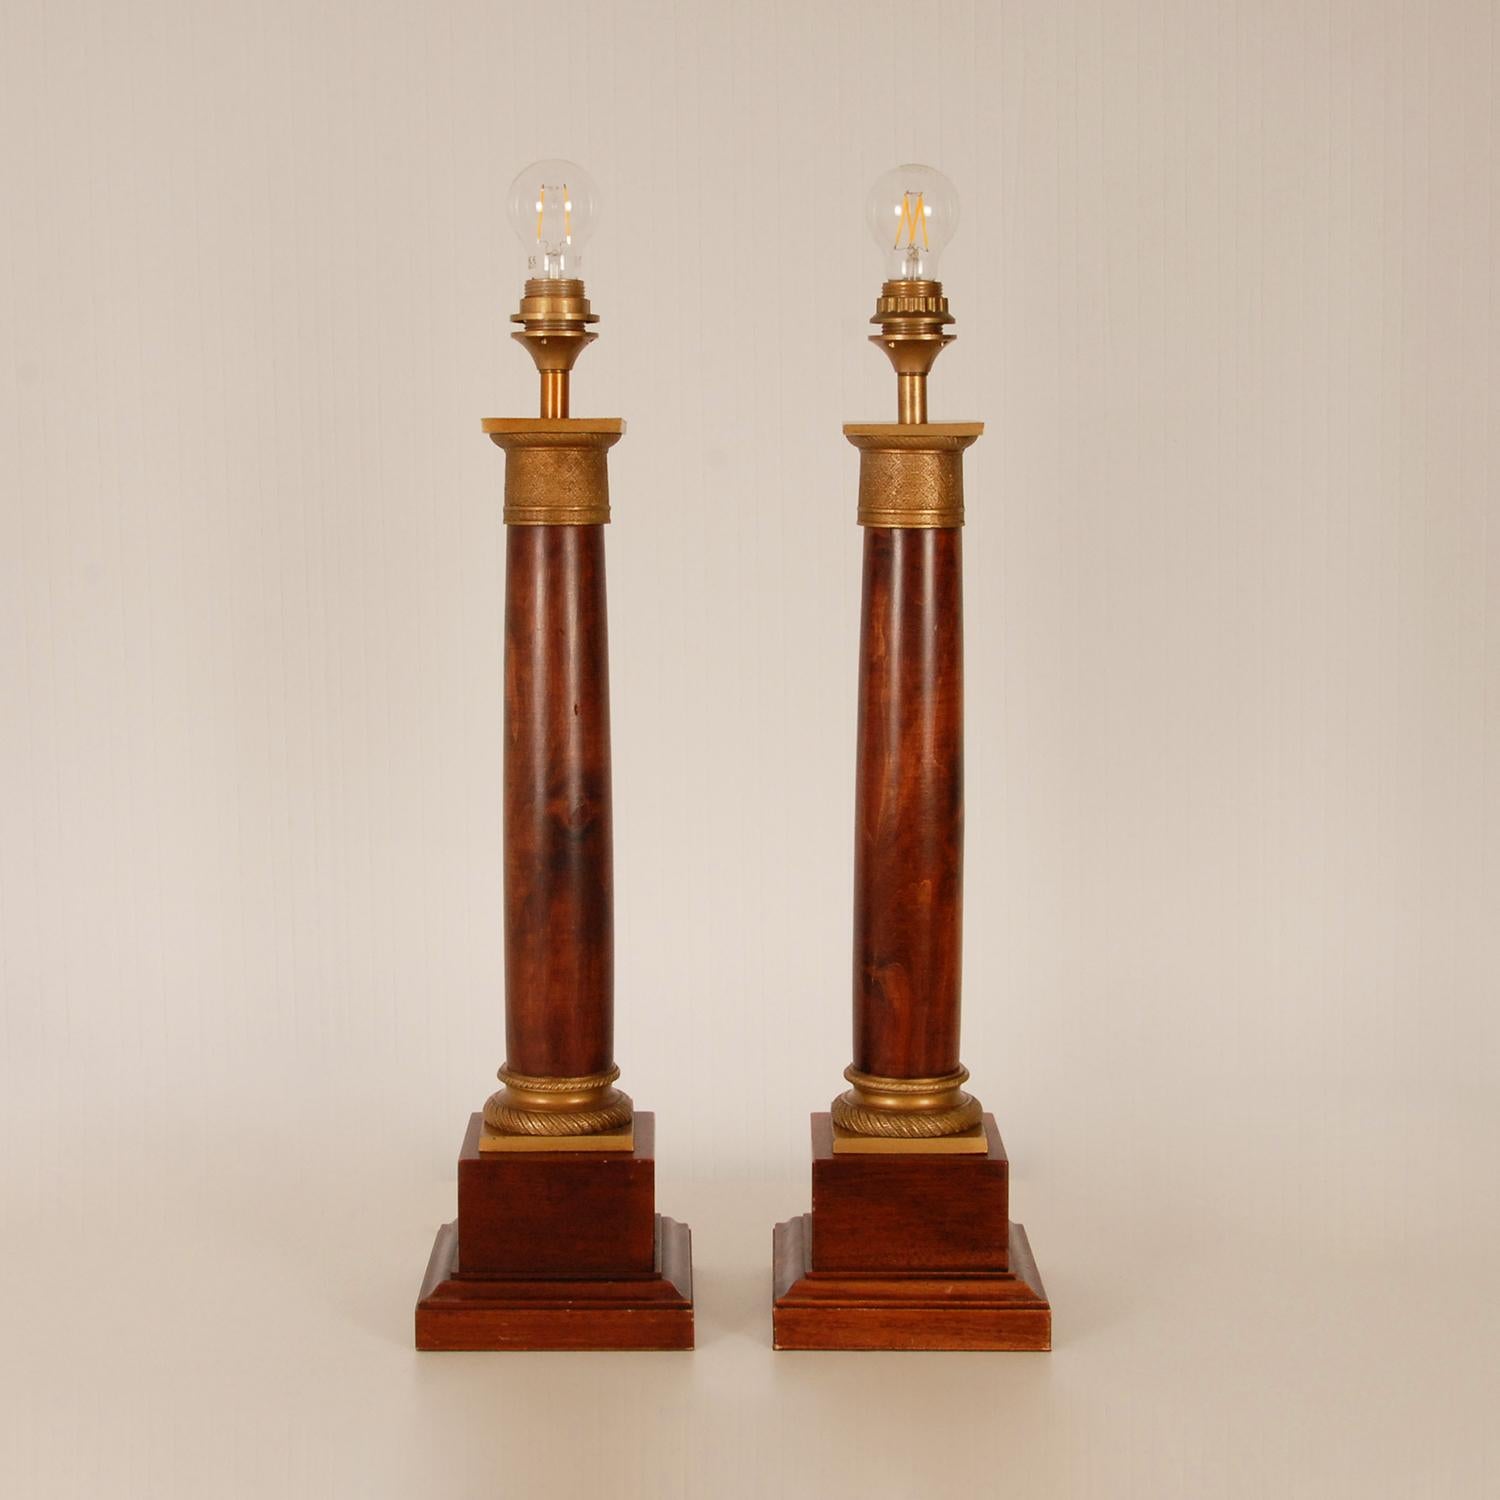 Cast Empire Table Lamps Regency Gold Gilt Bronze Mahogany Column Lamps French a pair